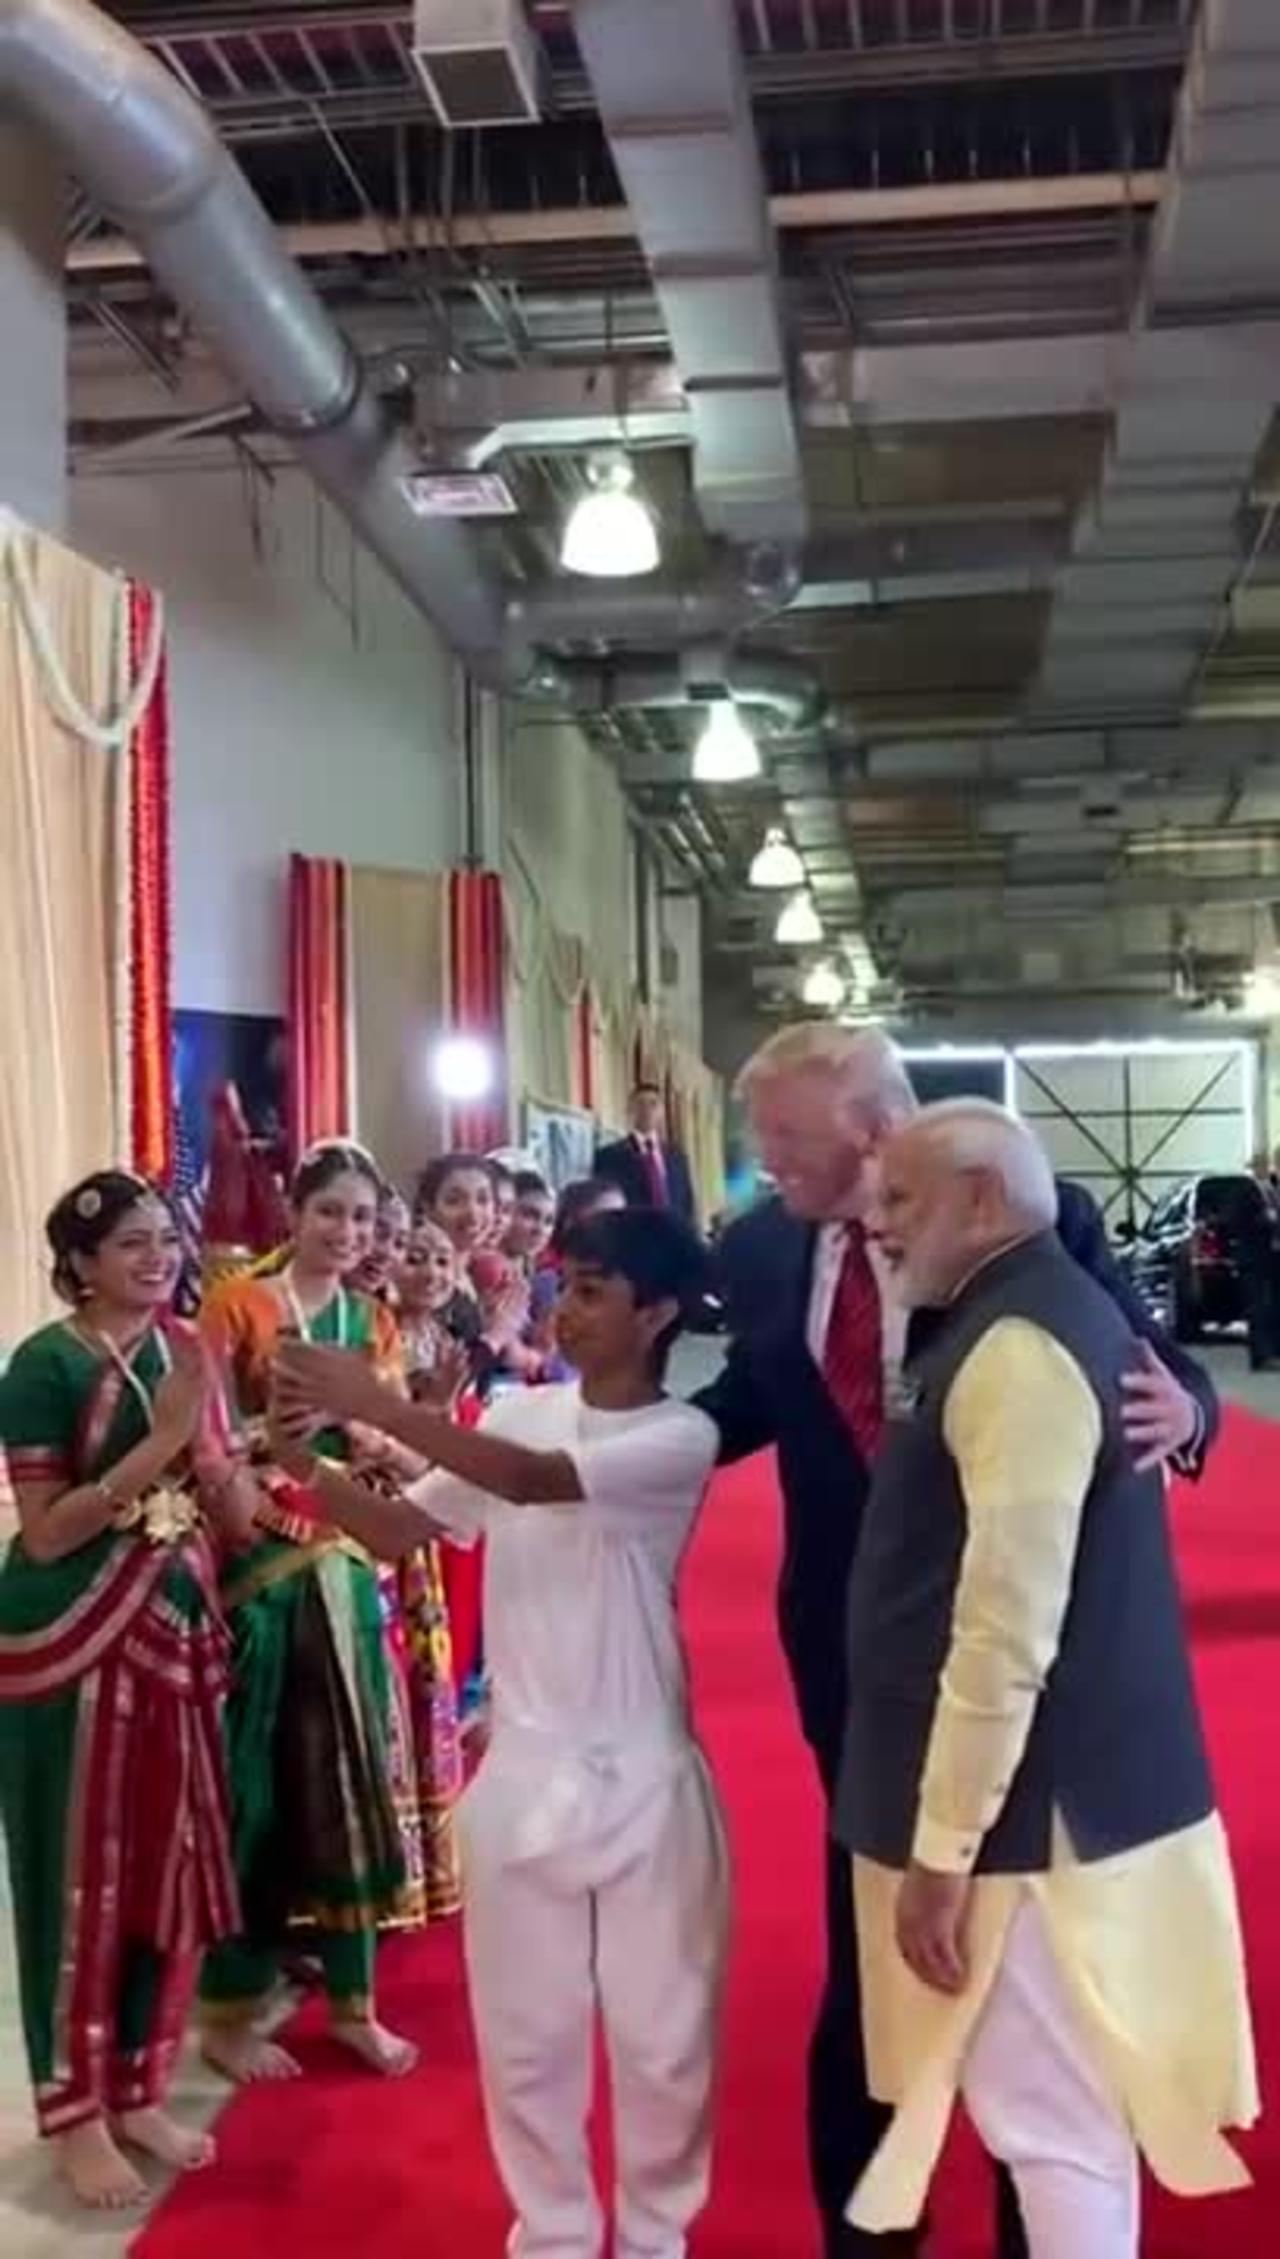 President Trump & PM Modi interacted with a group of youngster.